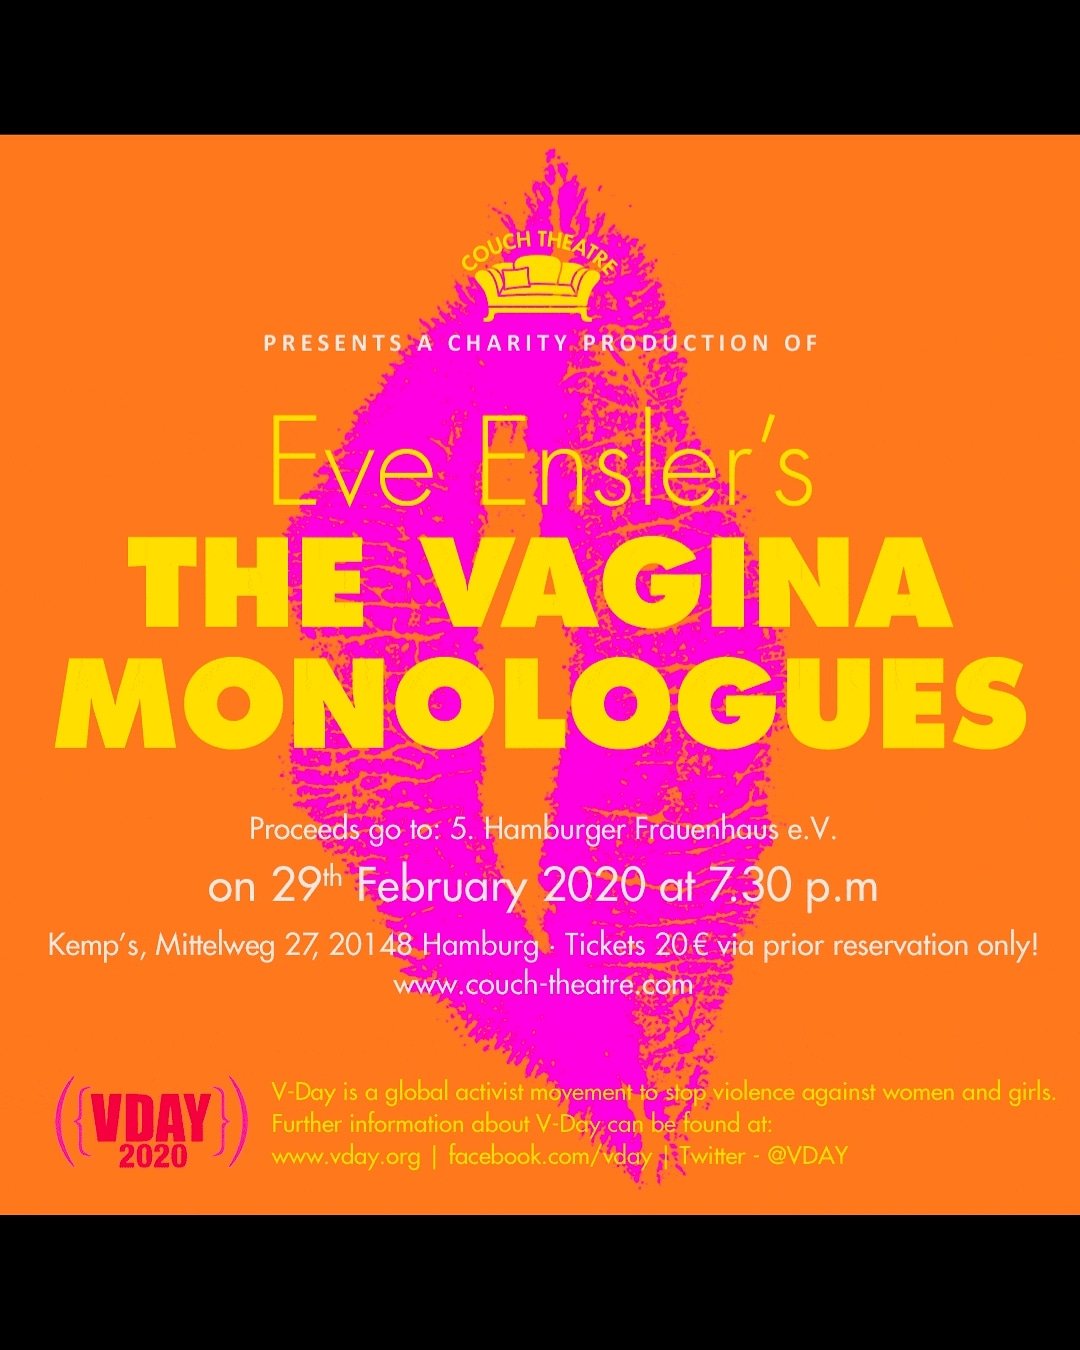 V-DAY 2020. Couch Theatre presents The Vagina Monologues by Eve Ensler. In English.